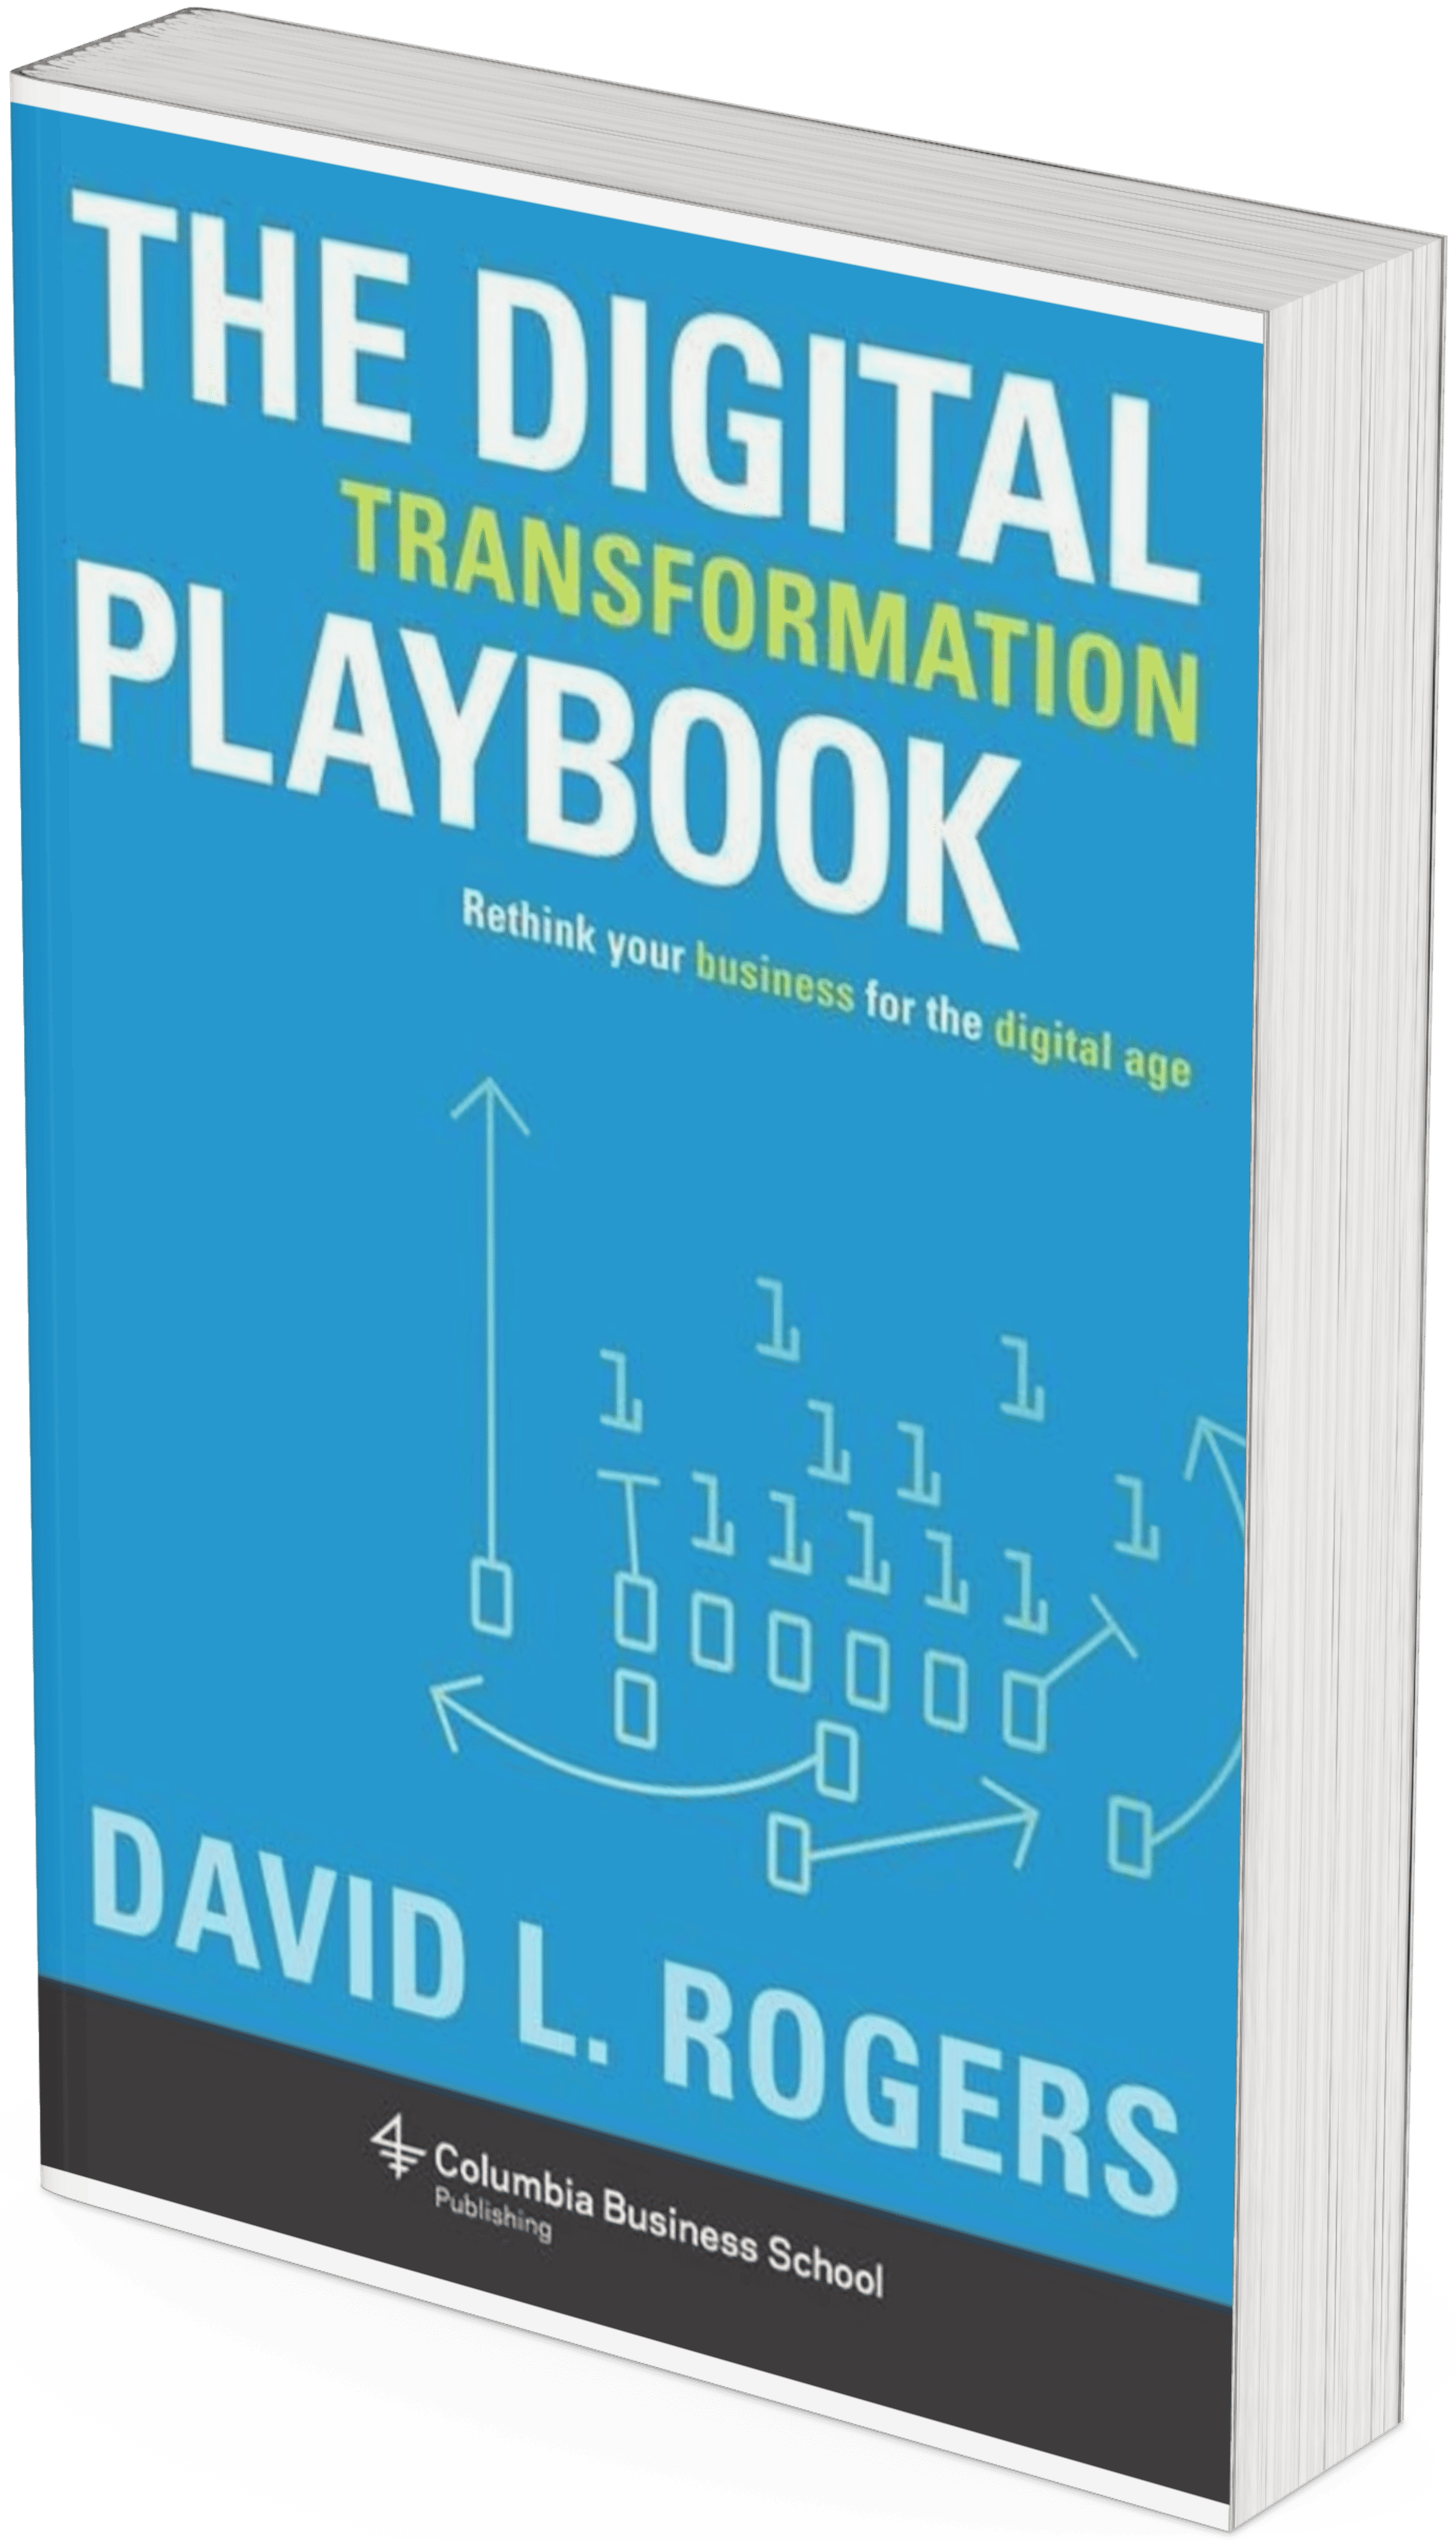 mock-up of "The Digital Transformation Playbook" by David L Rogers